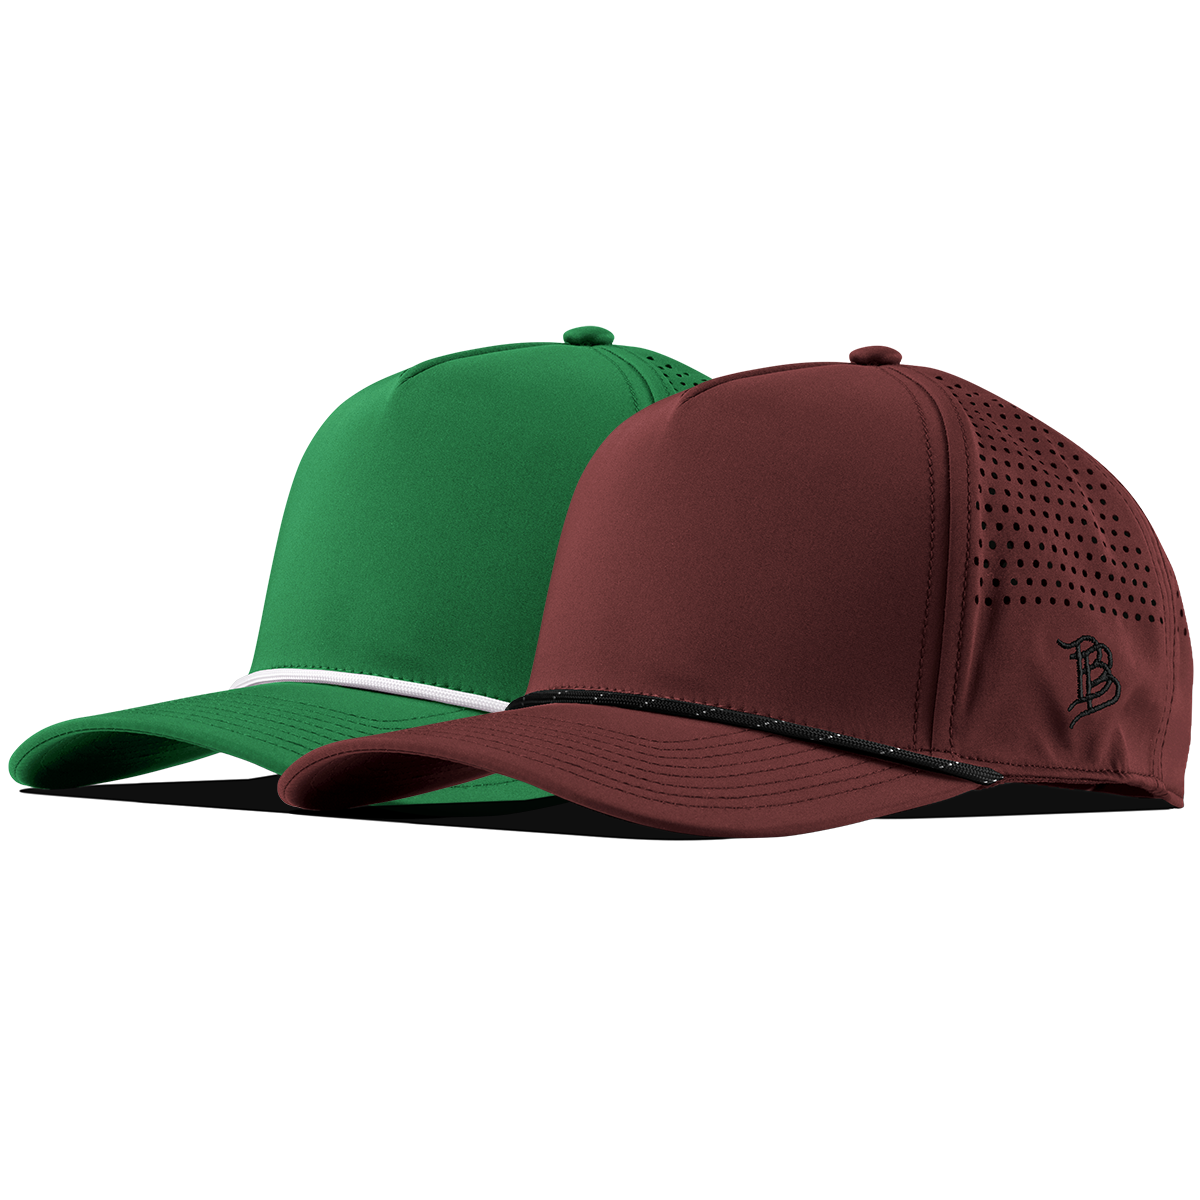 Bare Curved 5 Panel Rope 2-Pack Maroon/Black + Kelly Green/White